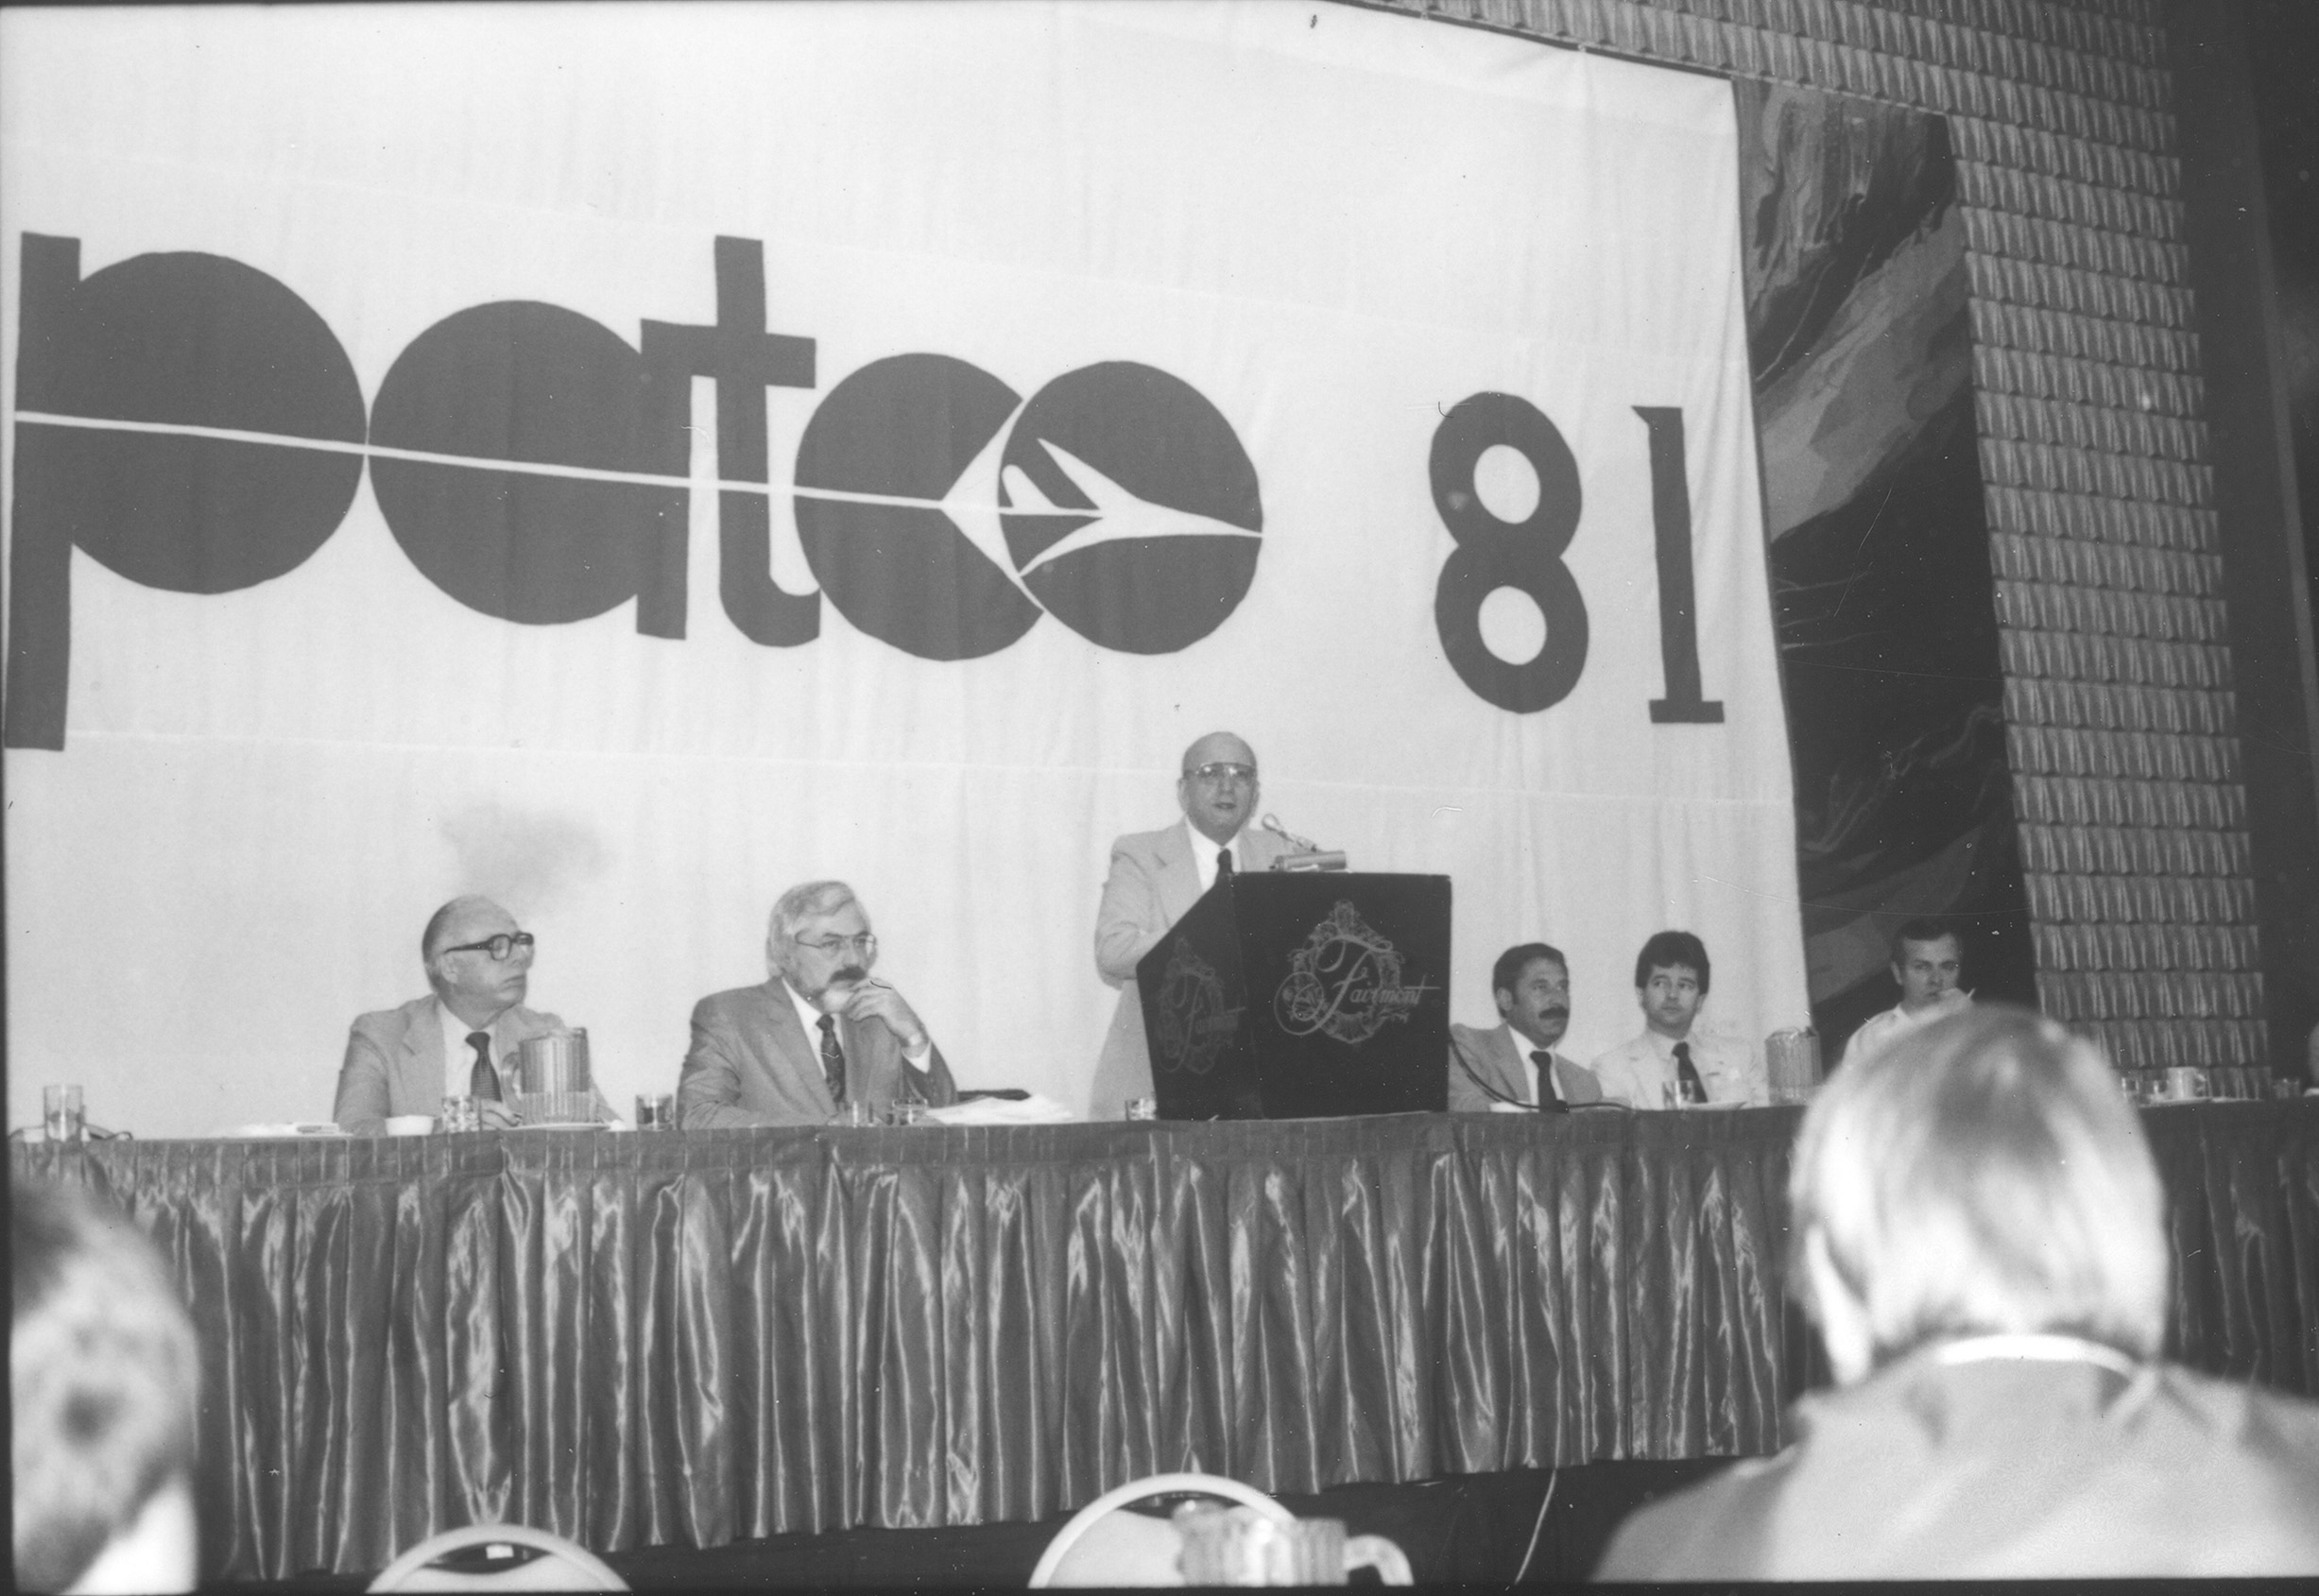 Man speaking at podium with other men alongside him at the presenters' table. "PATCO '81" displayed on wall behind them.